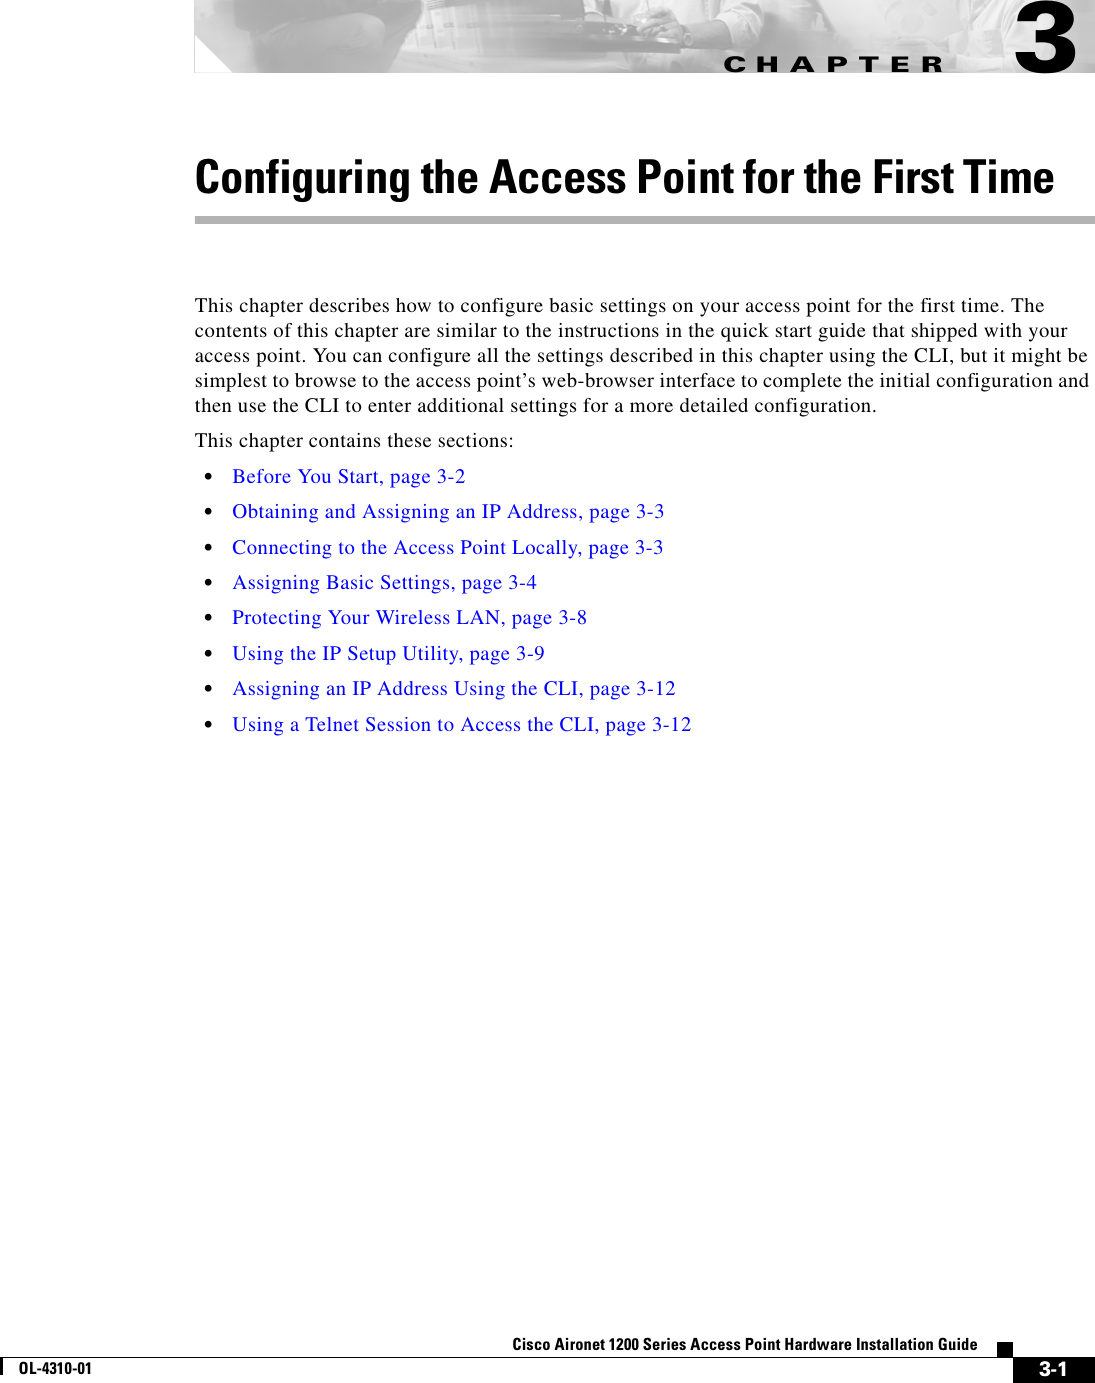 CHAPTER 3-1Cisco Aironet 1200 Series Access Point Hardware Installation GuideOL-4310-013Configuring the Access Point for the First TimeThis chapter describes how to configure basic settings on your access point for the first time. The contents of this chapter are similar to the instructions in the quick start guide that shipped with your access point. You can configure all the settings described in this chapter using the CLI, but it might be simplest to browse to the access point’s web-browser interface to complete the initial configuration and then use the CLI to enter additional settings for a more detailed configuration. This chapter contains these sections:•Before You Start, page 3-2•Obtaining and Assigning an IP Address, page 3-3•Connecting to the Access Point Locally, page 3-3•Assigning Basic Settings, page 3-4•Protecting Your Wireless LAN, page 3-8•Using the IP Setup Utility, page 3-9•Assigning an IP Address Using the CLI, page 3-12•Using a Telnet Session to Access the CLI, page 3-12